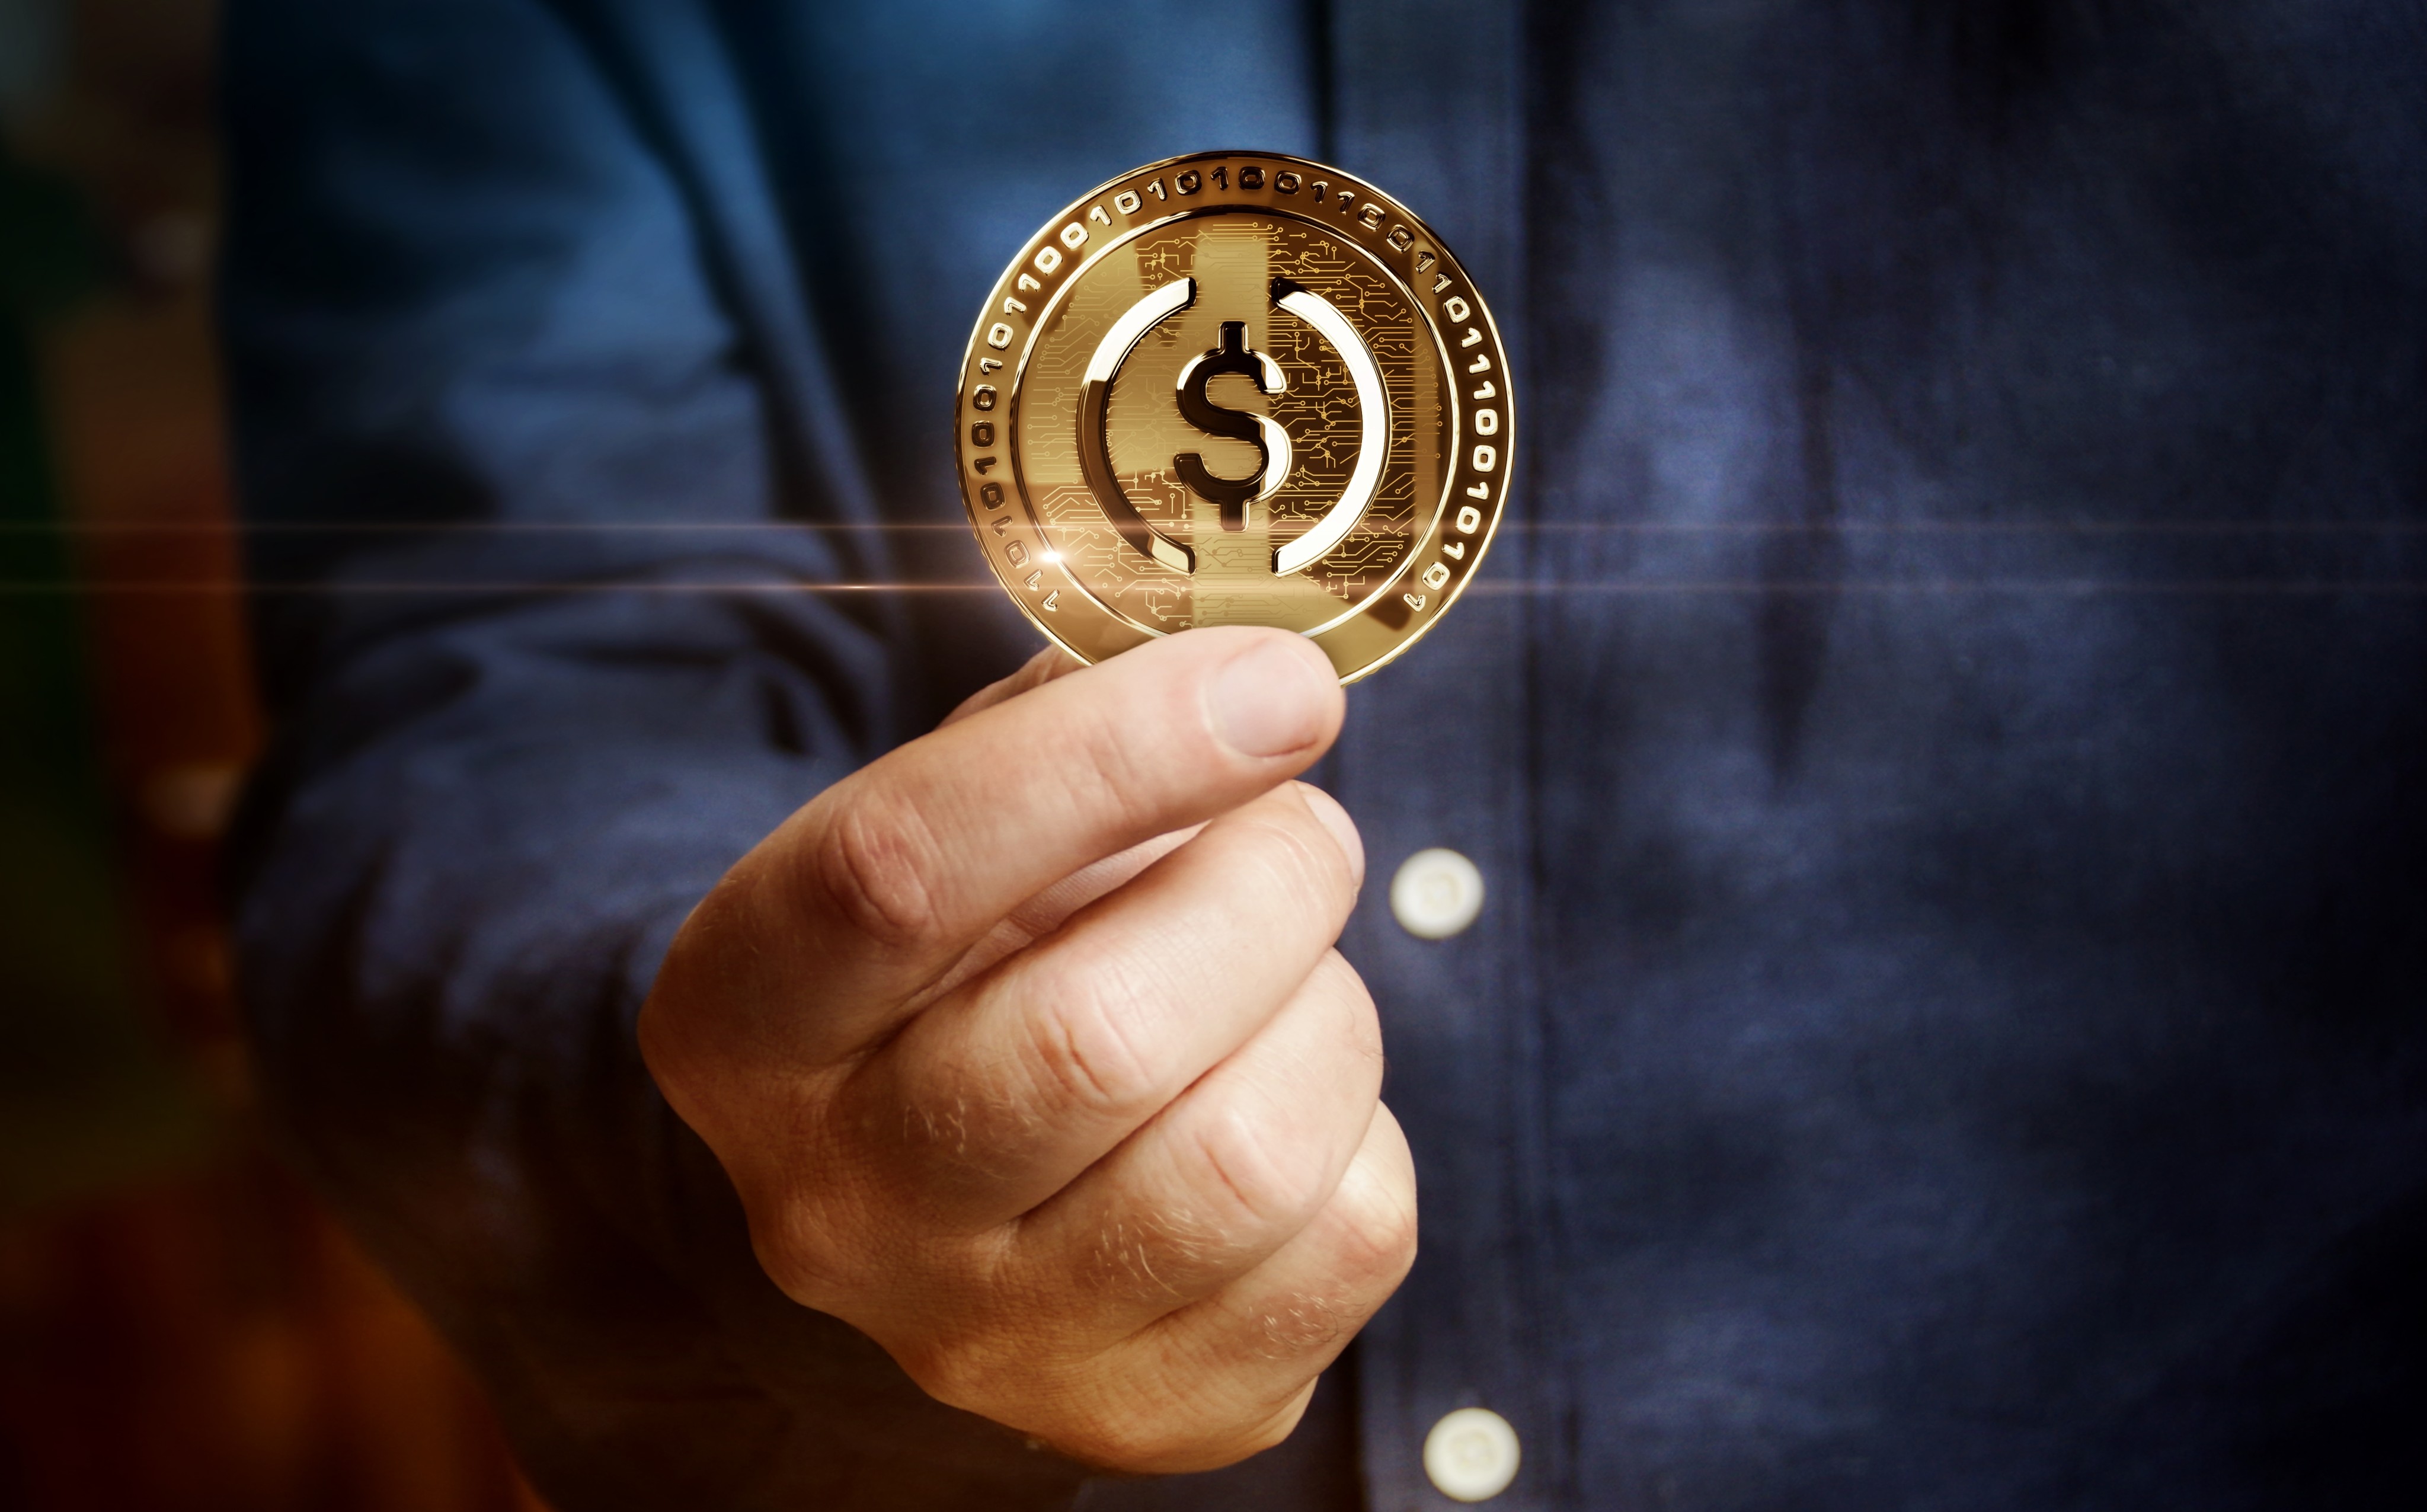 Unlike other cryptocurrencies, stablecoins are viewed as safe haven assets as their values are pegged to traditional currencies or other assets. Photo: Shutterstock 